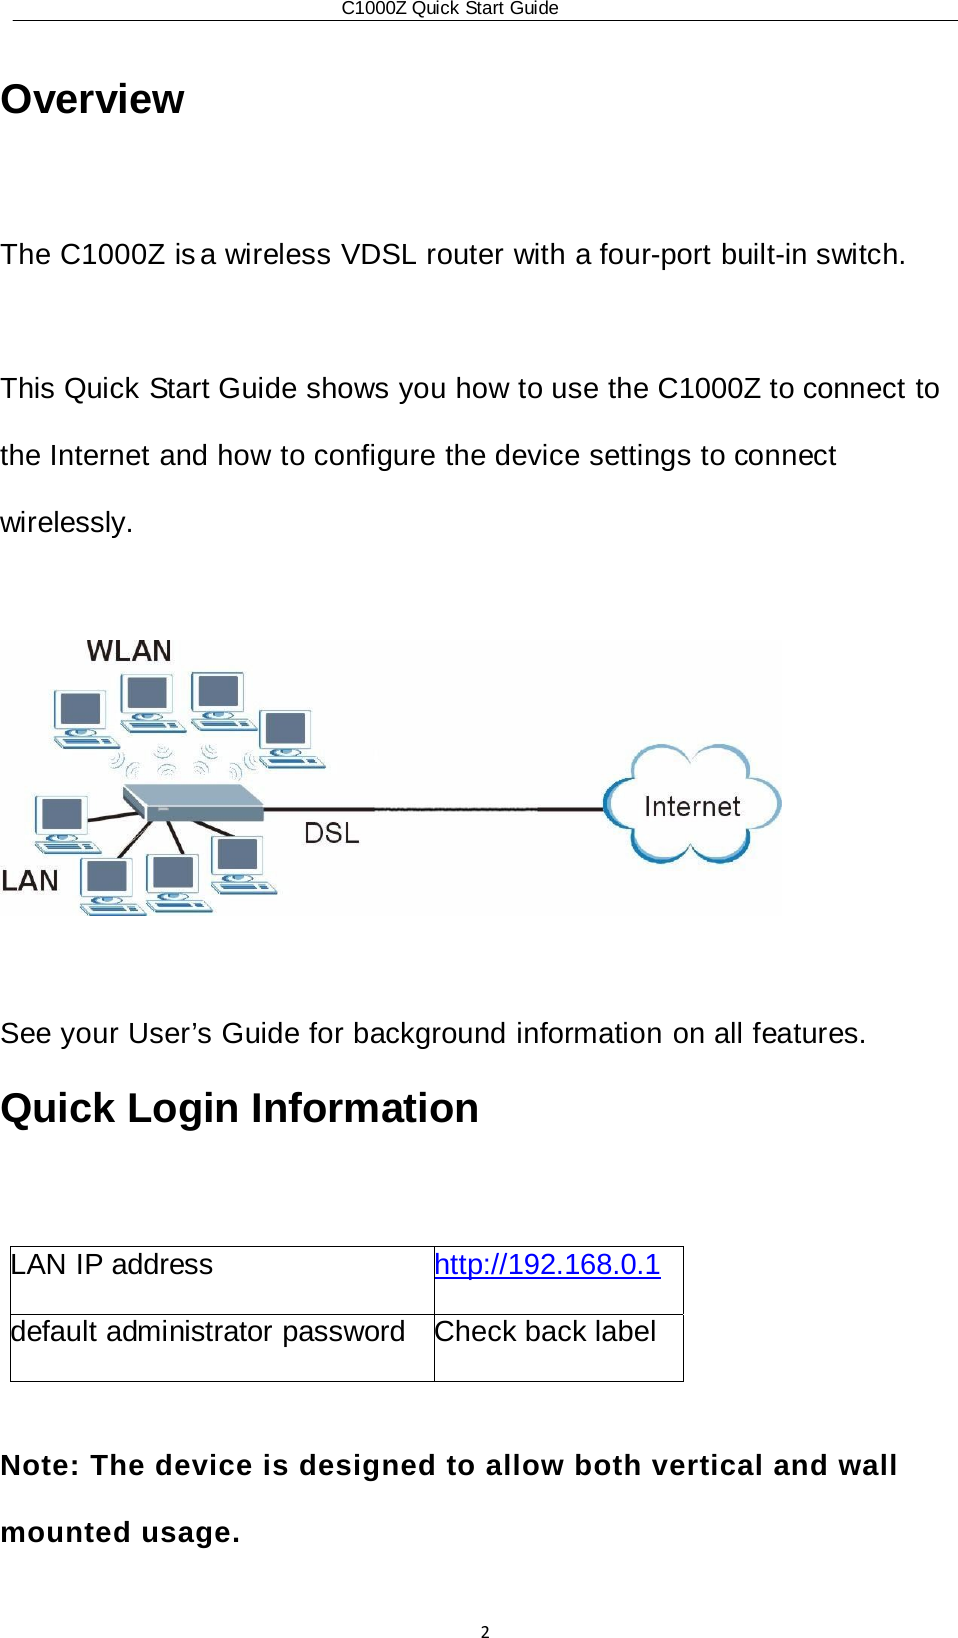 C1000Z Quick Start Guide2 Overview  The C1000Z is a wireless VDSL router with a four-port built-in switch.  This Quick Start Guide shows you how to use the C1000Z to connect to the Internet and how to configure the device settings to connect wirelessly.    See your User’s Guide for background information on all features. Quick Login Information  LAN IP address  http://192.168.0.1 default administrator password  Check back label  Note: The device is designed to allow both vertical and wall mounted usage.  